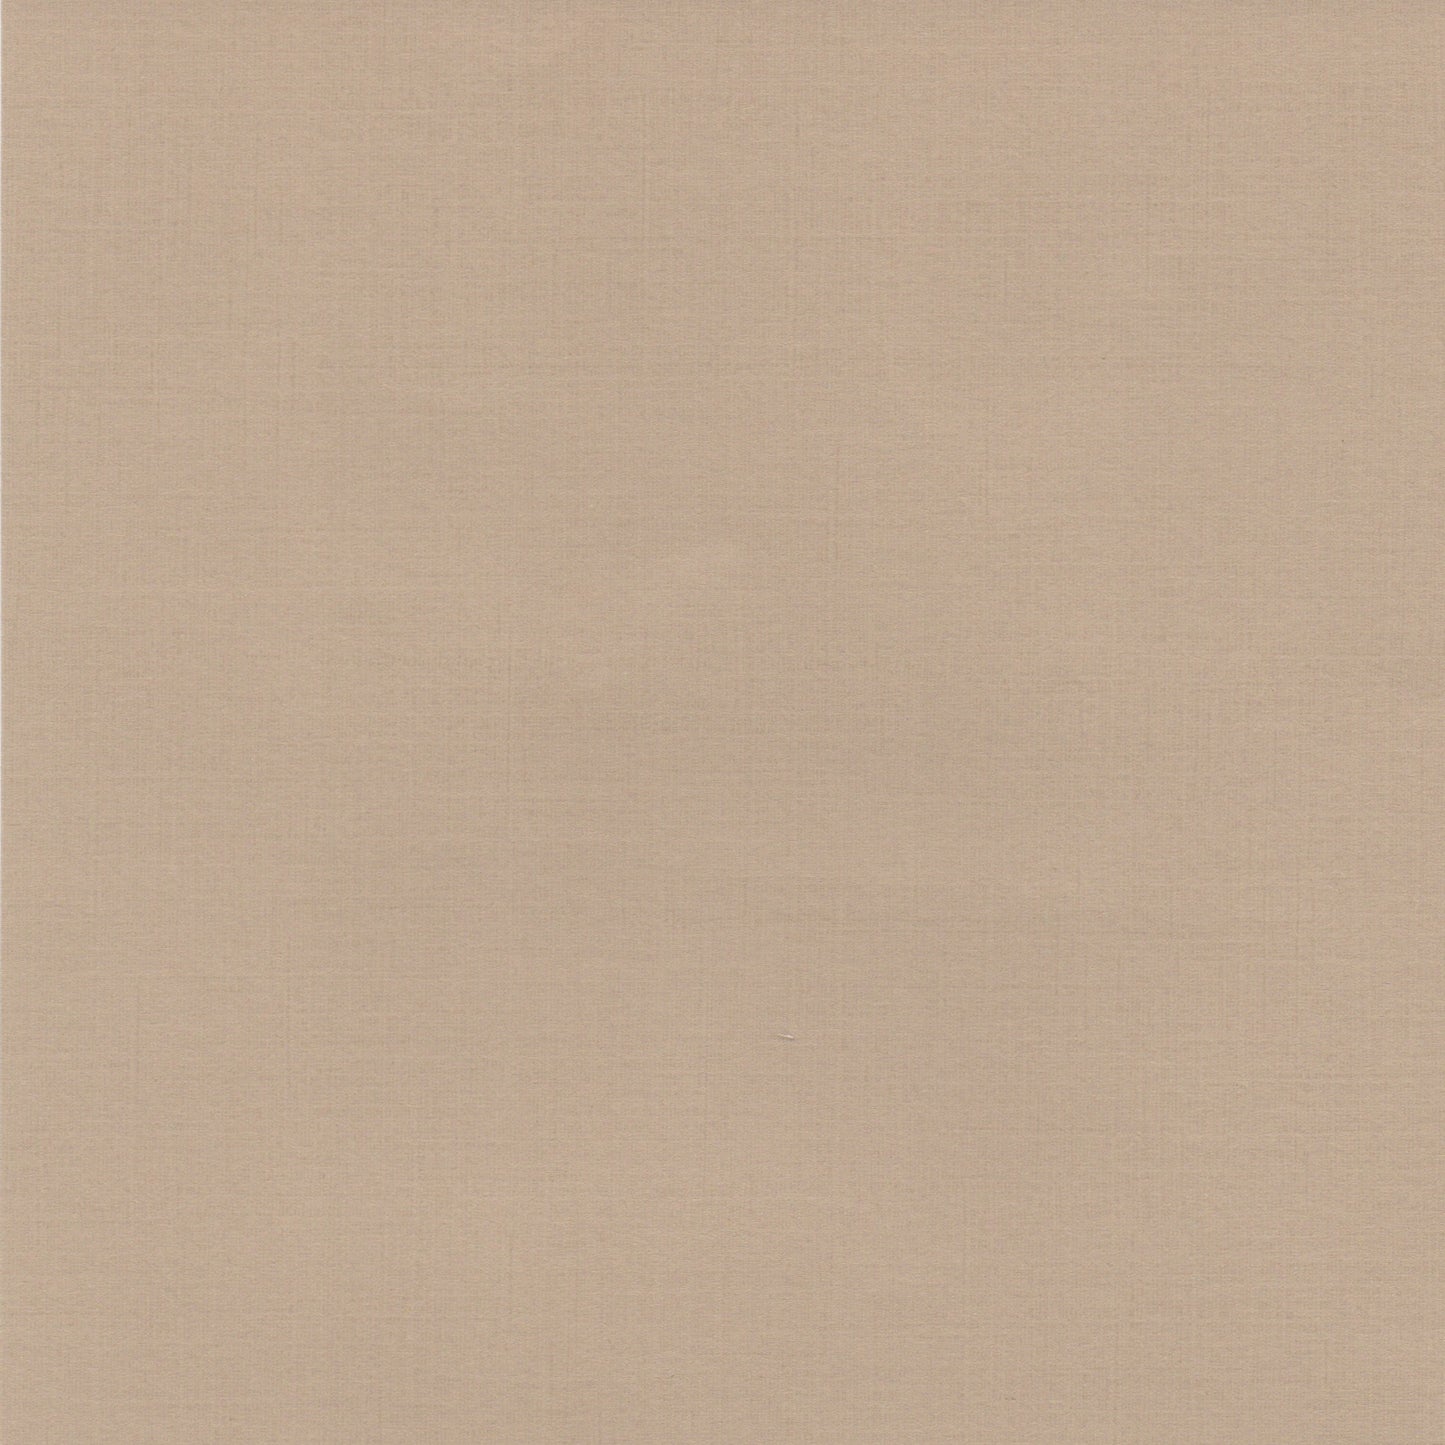 Pack of 20 Sheets 14x14cm Textured Linen Paper - Tan - washi paper - Lavender Home London